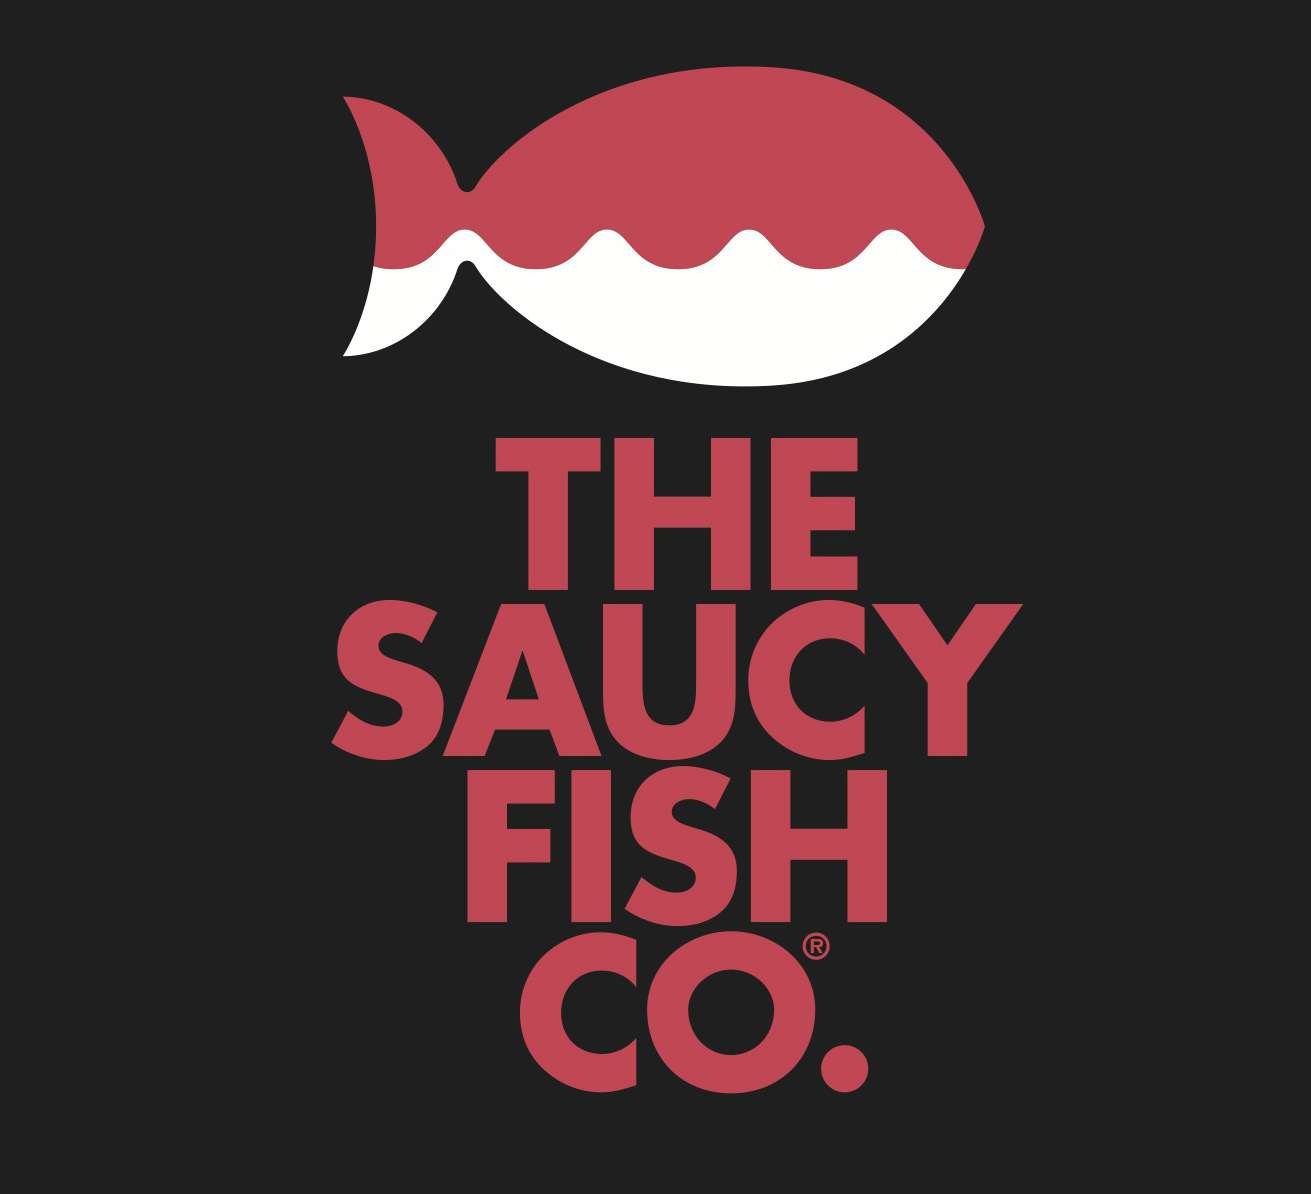 £1 off The Saucy Fish Co